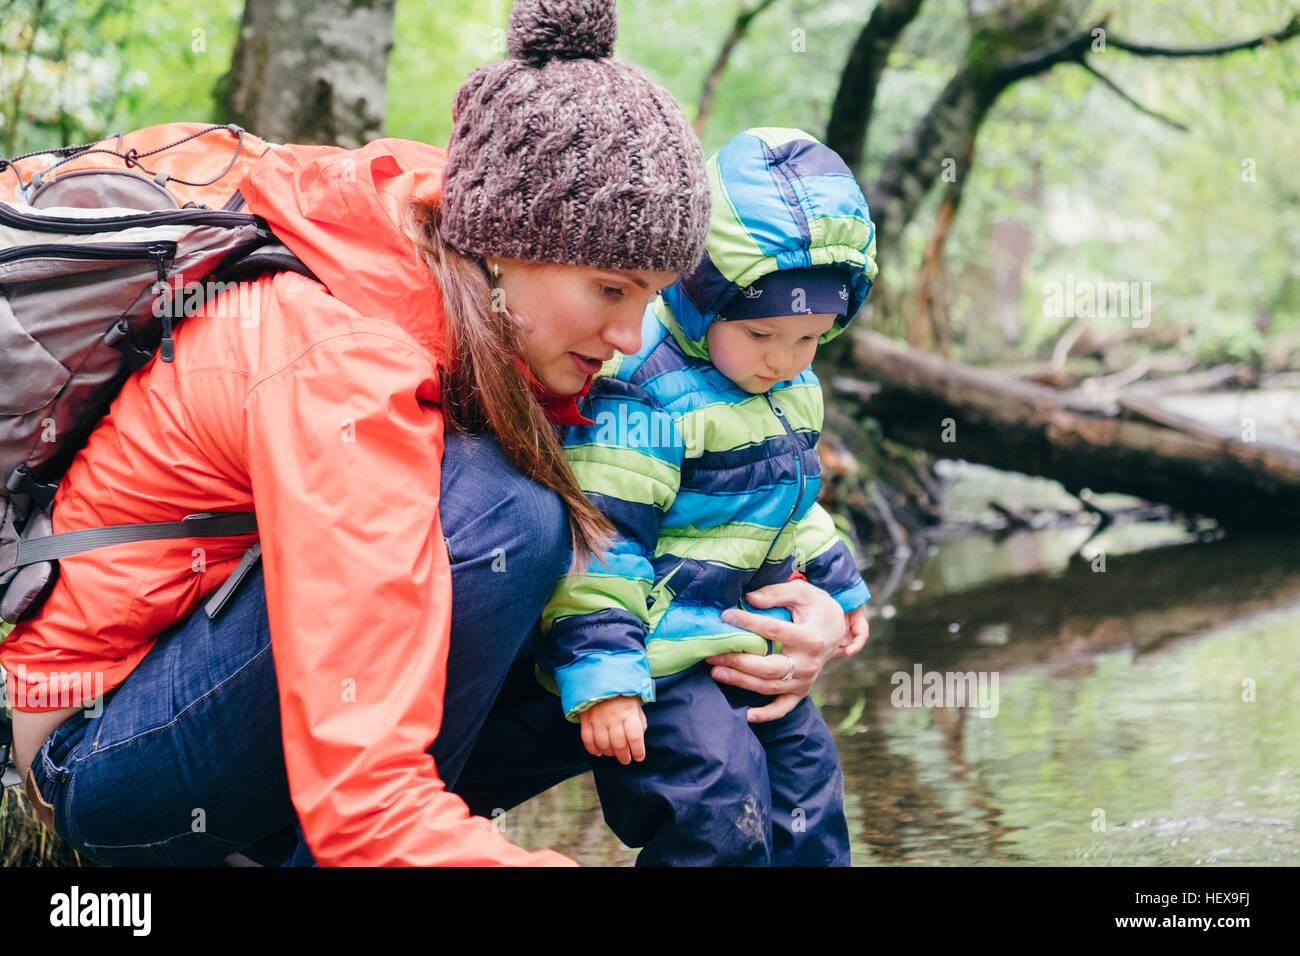 Mother and son exploring forest, Vancouver, British Columbia, Canada Stock Photo